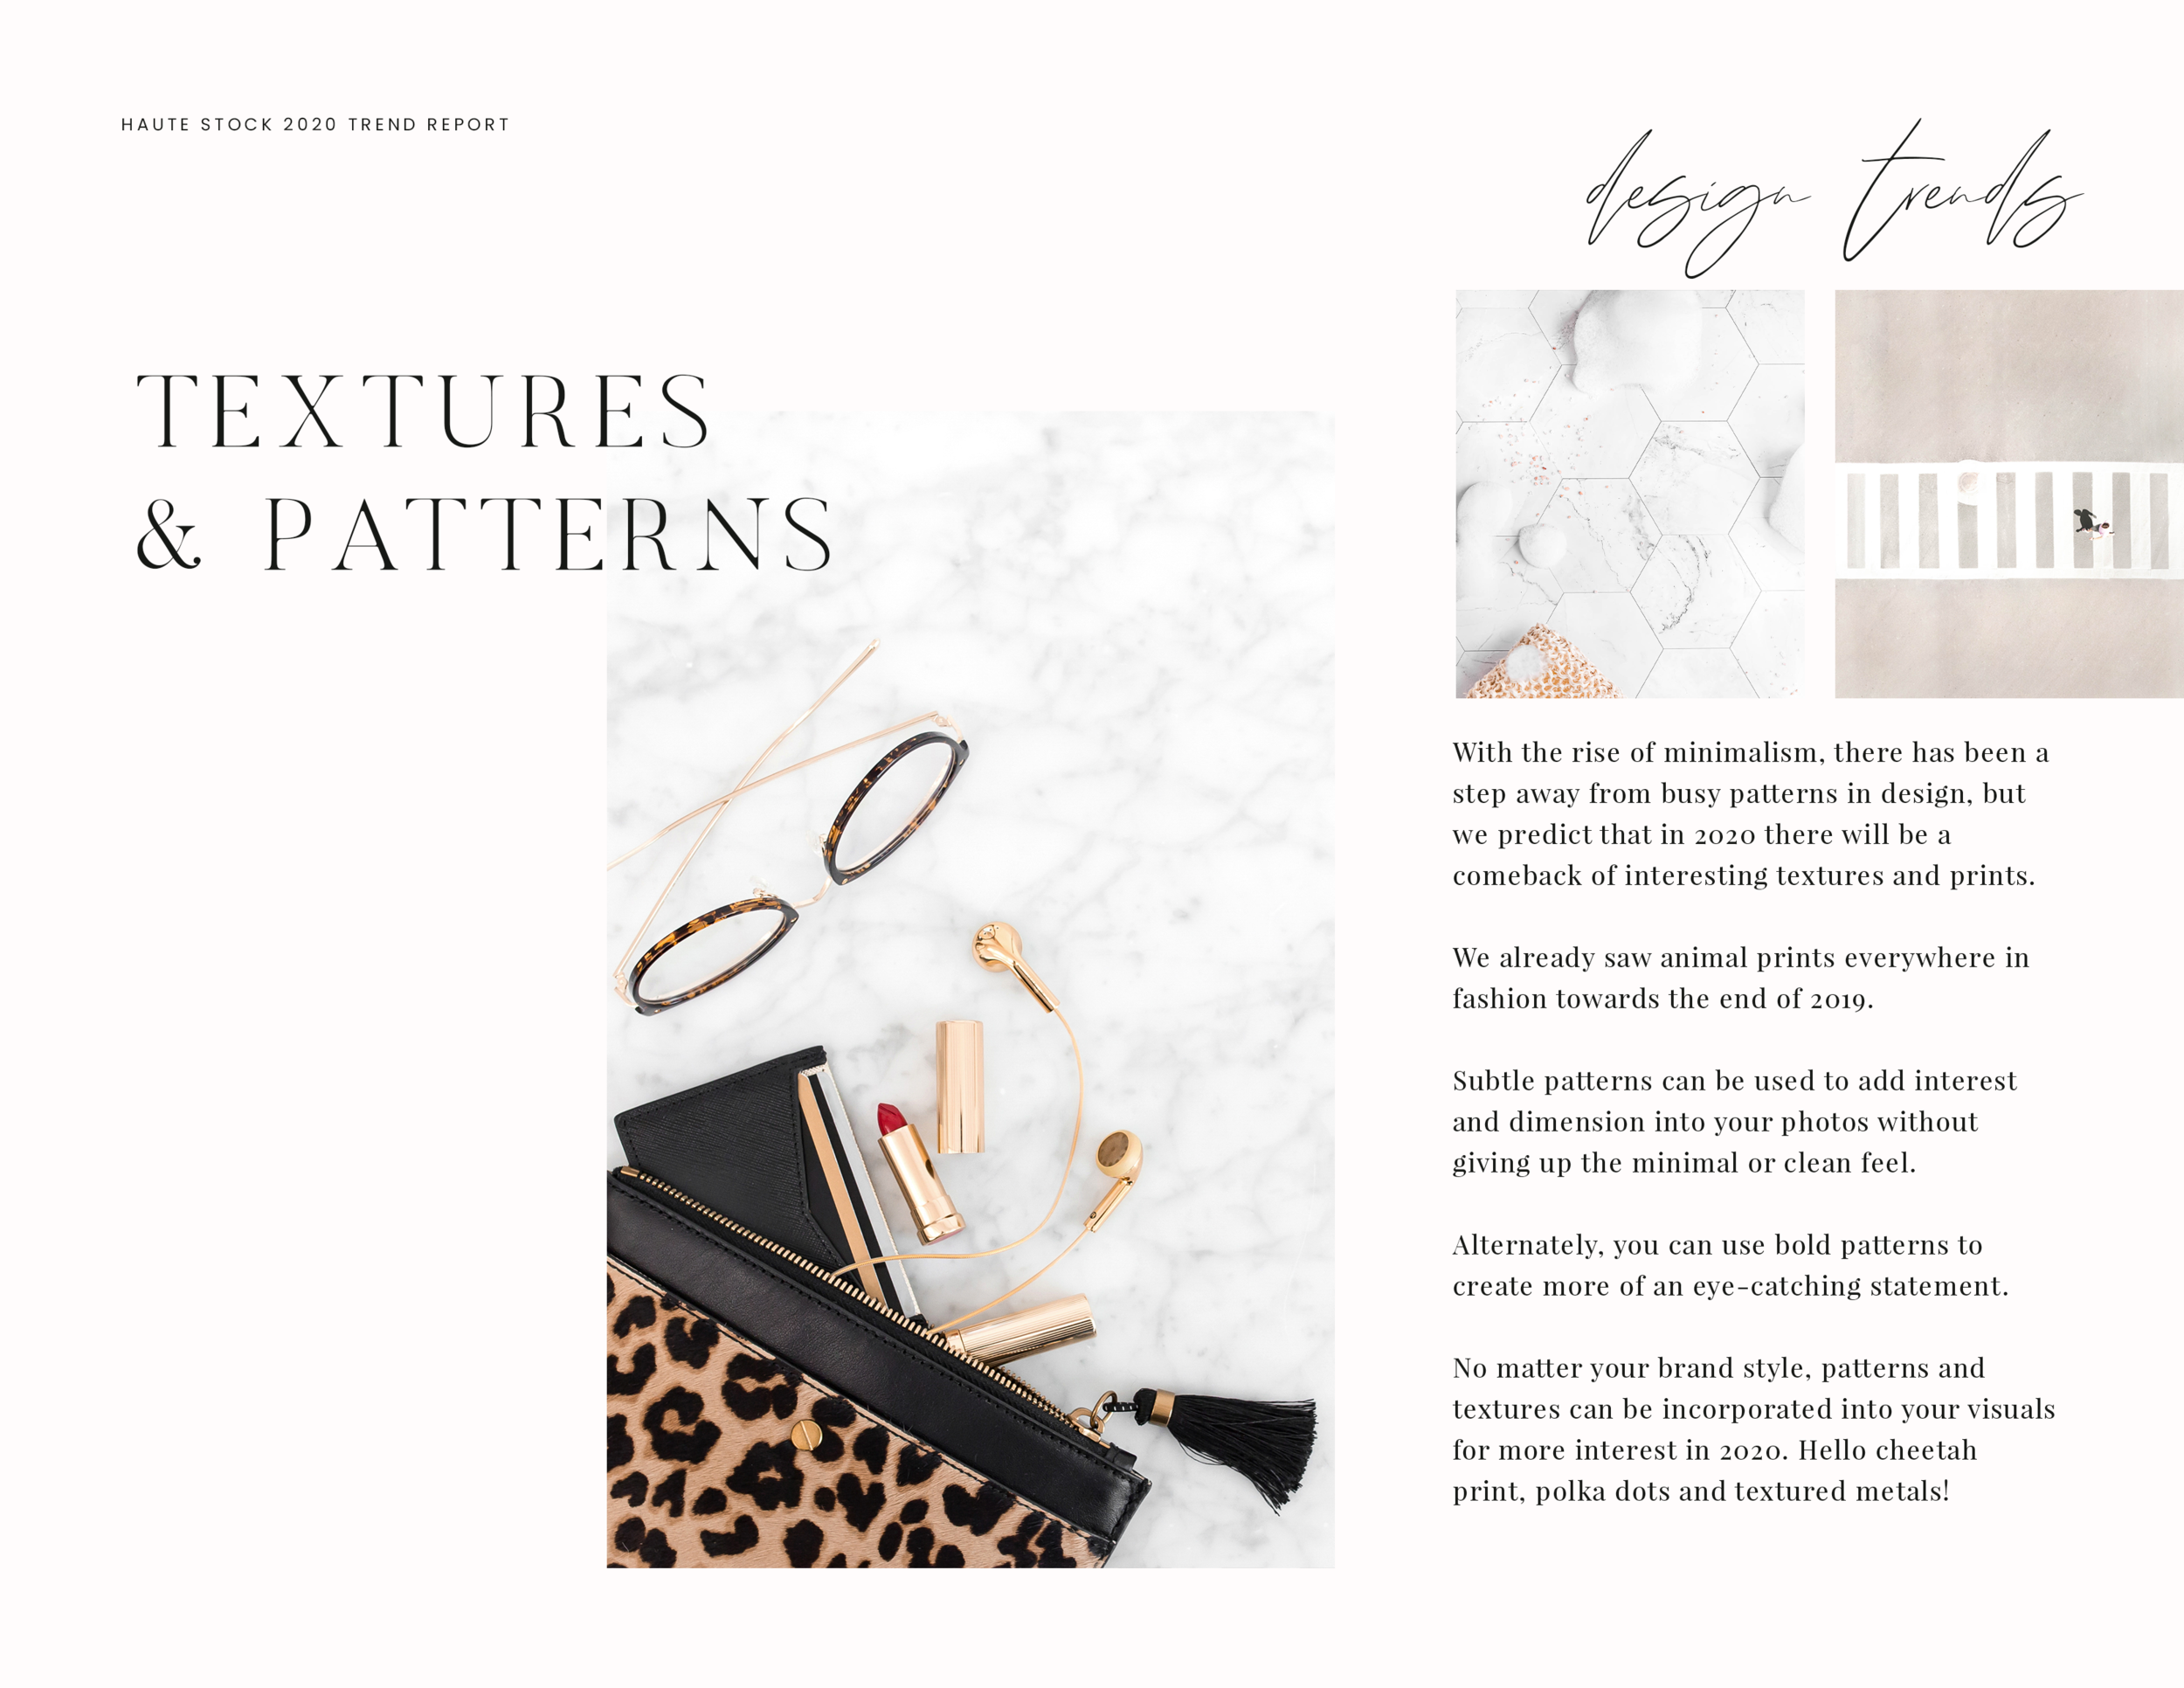 Textures and Patterns will be popular design trends in 2020.